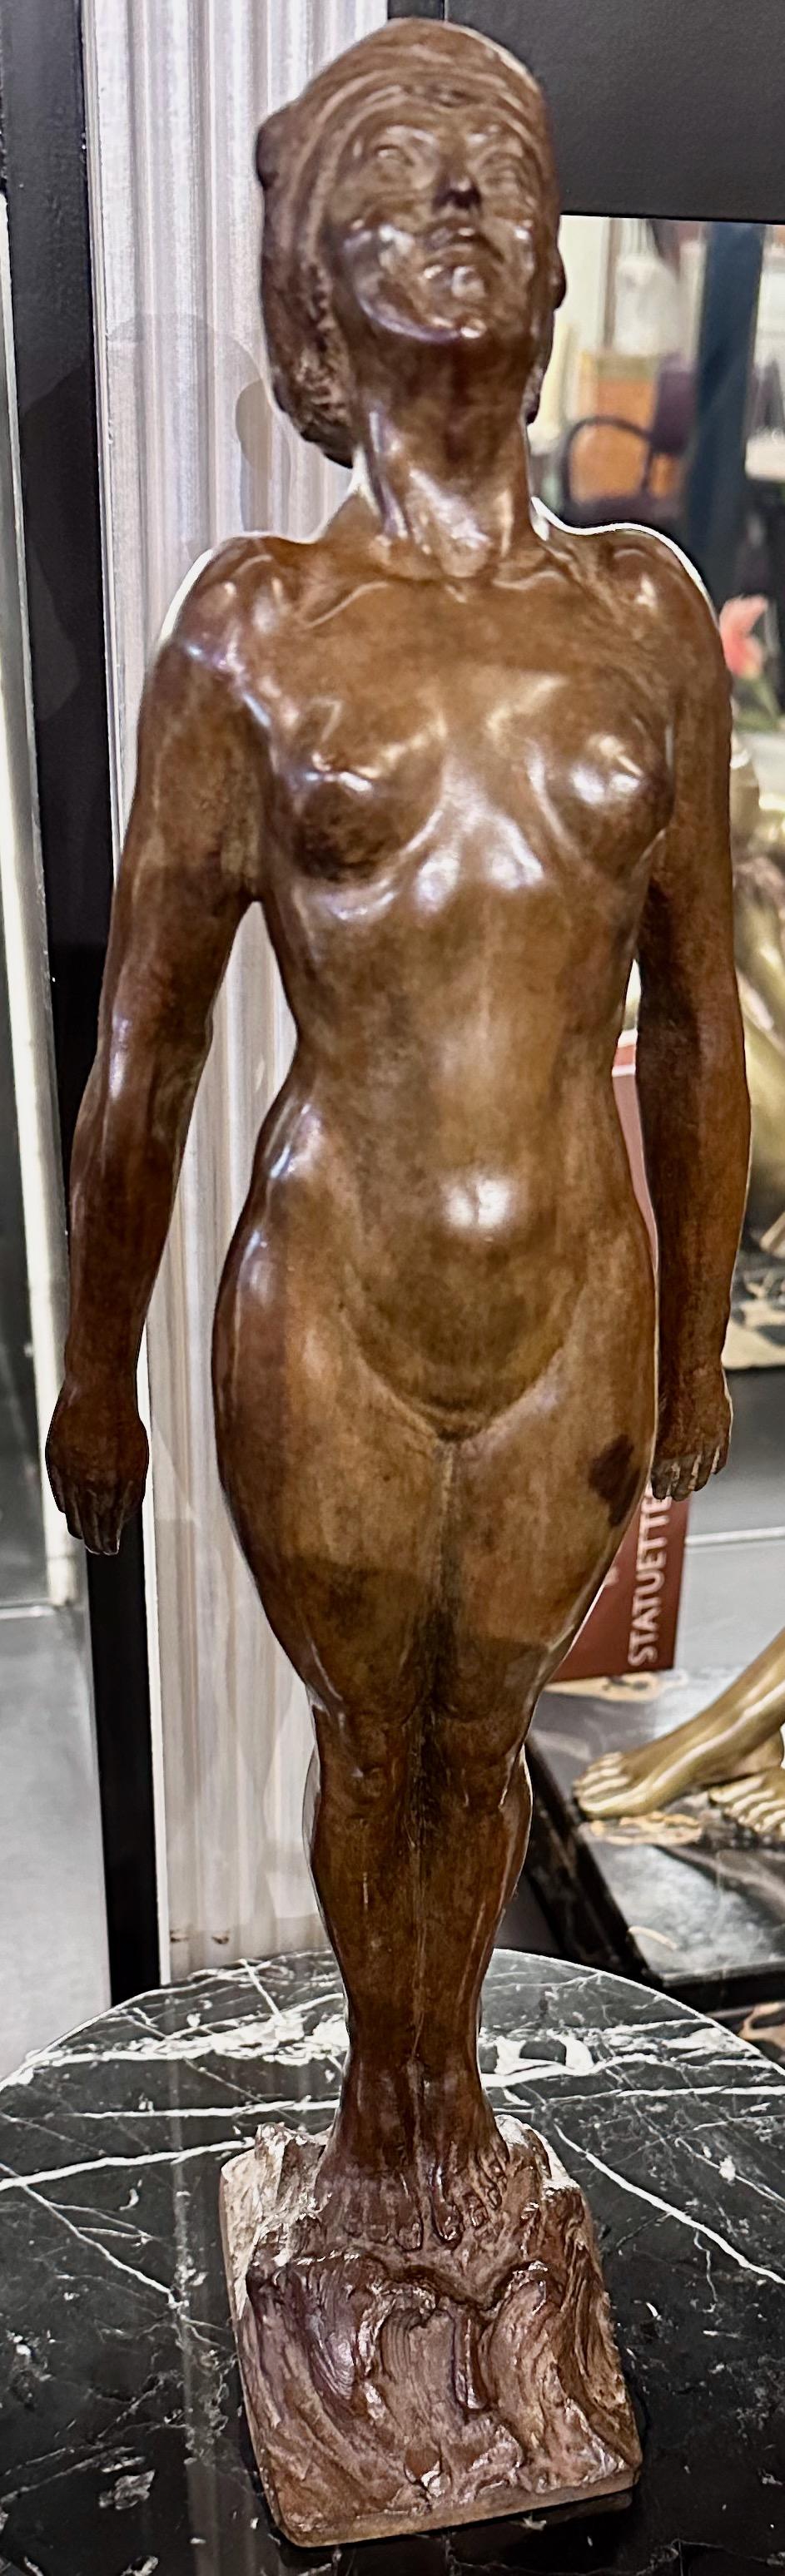 French Art Deco Bathing Nude Female Statue by Guillaume Dumont 1923 For Sale 1